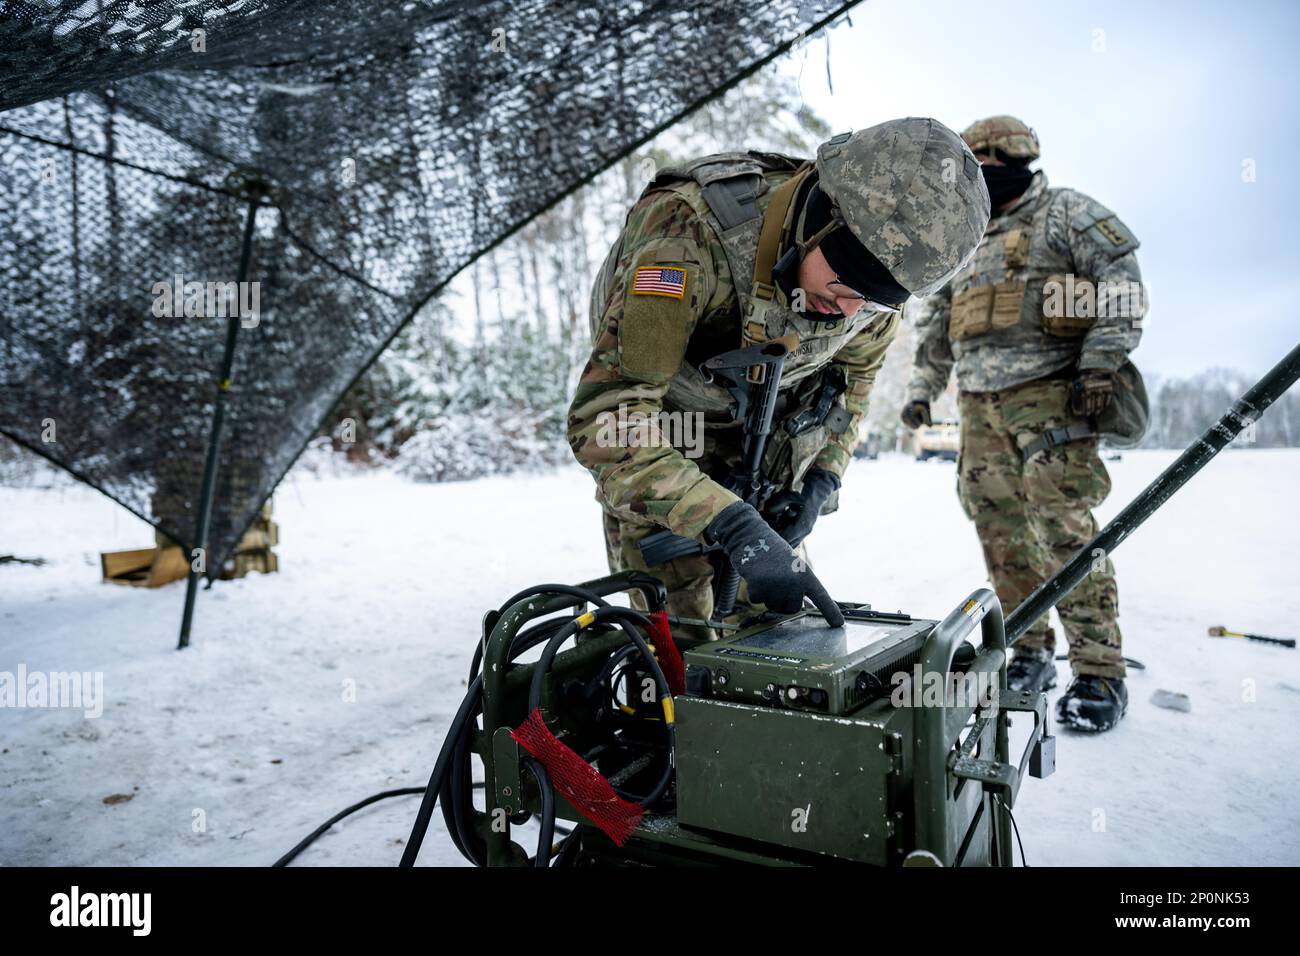 Army Staff Sgt. Ryan Wilichowski, 1-120th Field Artillery Regiment, responses to a message while setting up an M119 howitzer during Northern Strike 23-1, Jan. 25, 2023, at Camp Grayling, Mich. Units that participate in Northern Strike’s winter iteration build readiness by conducting joint, cold-weather training designed to meet objectives of the Department of Defense’s Arctic Strategy. Stock Photo